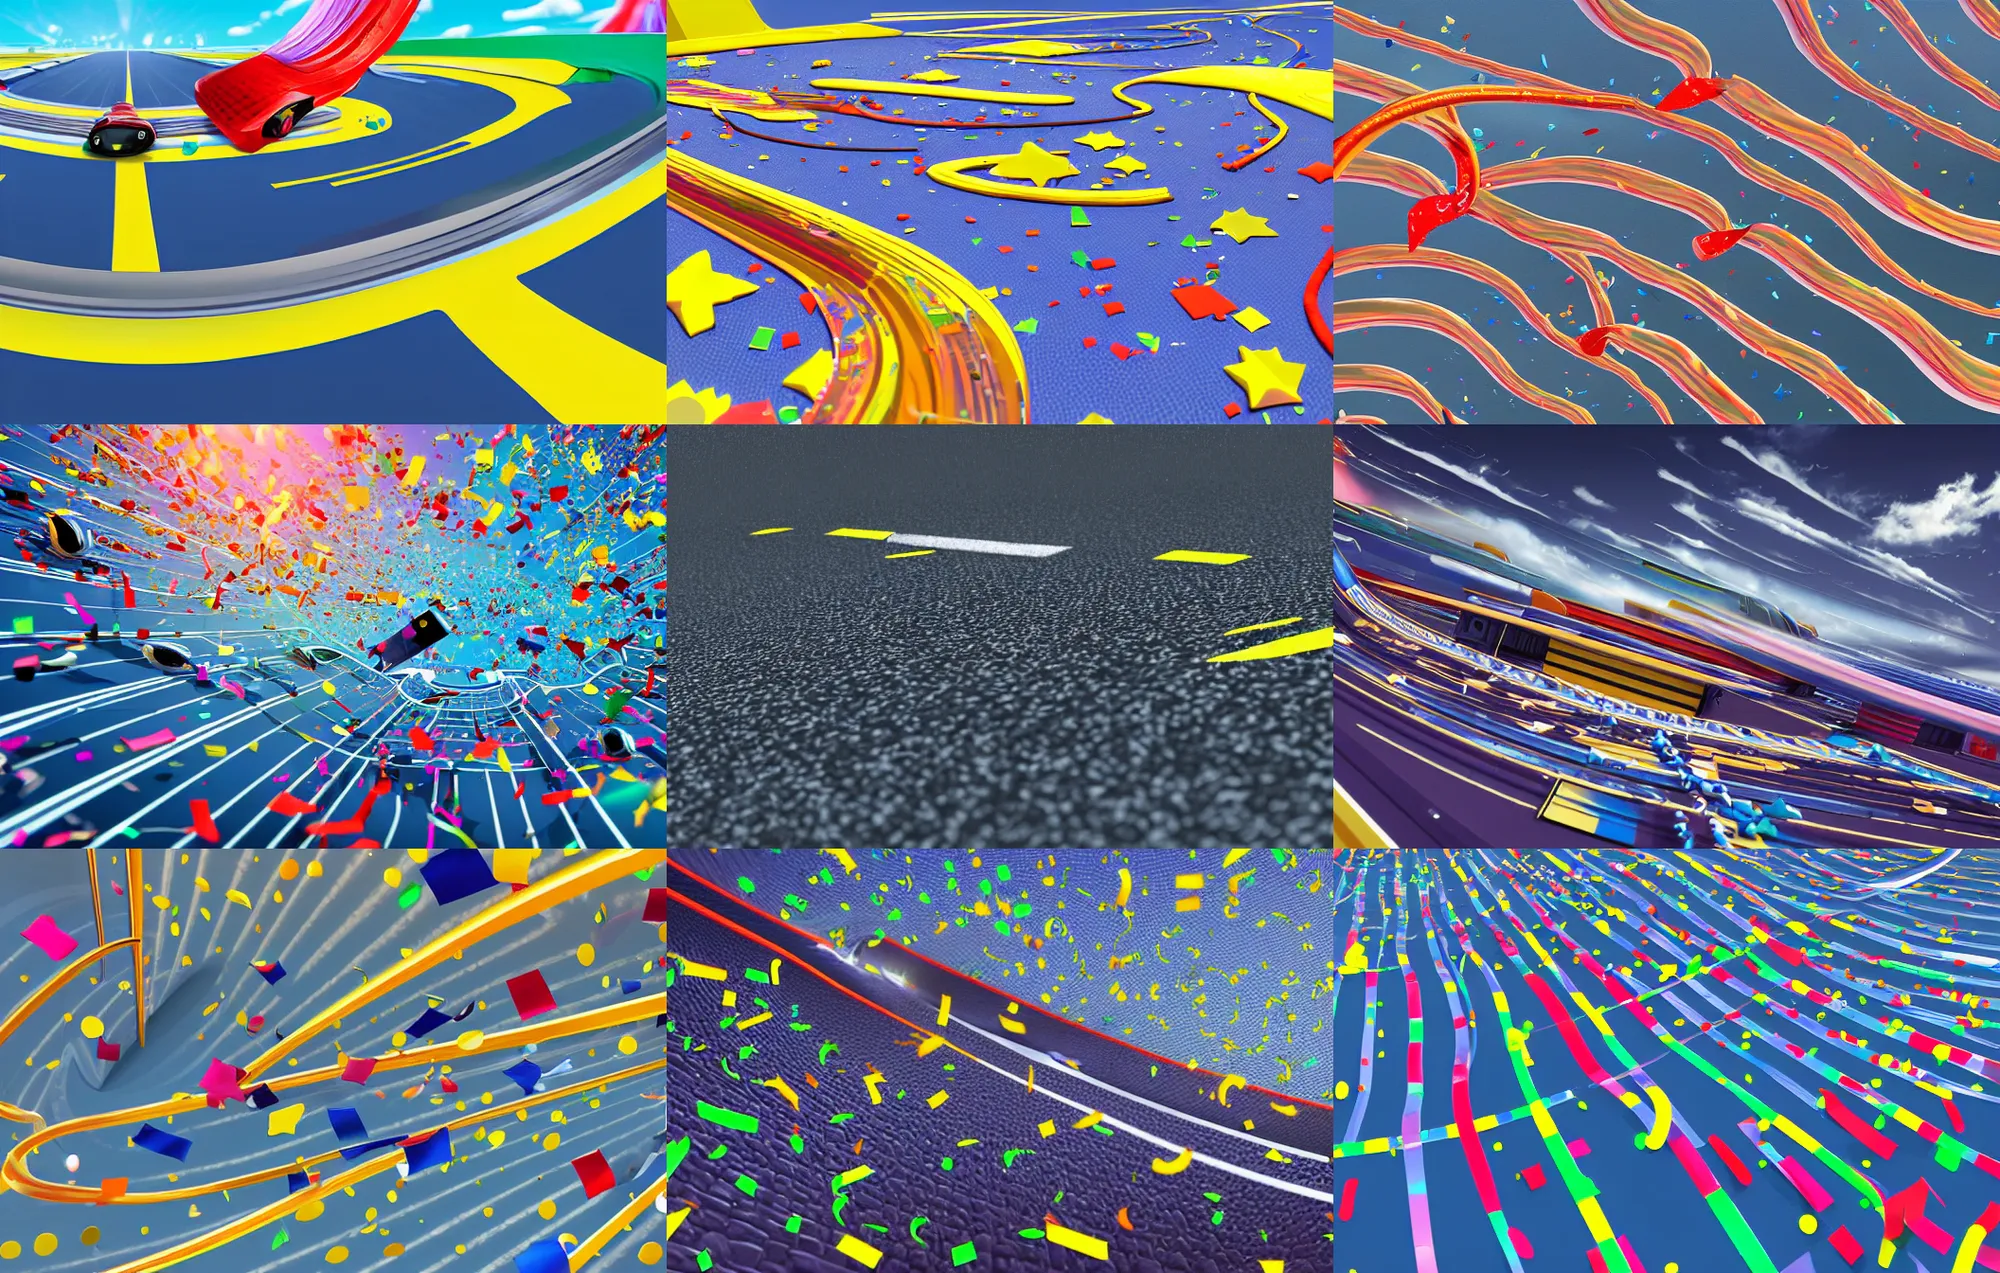 Prompt: low angle wide angle shot worms eye view angled up of a realistic futuristic vehicle racetrack finish line with confetti on a sunny day with a clear blue cloudy sky, cyberpunk, digital painting, good value control, crowded stands, rule of thirds, golden ratio, horizon line focus, sharp focus, fourze, realistic textures, 8 k